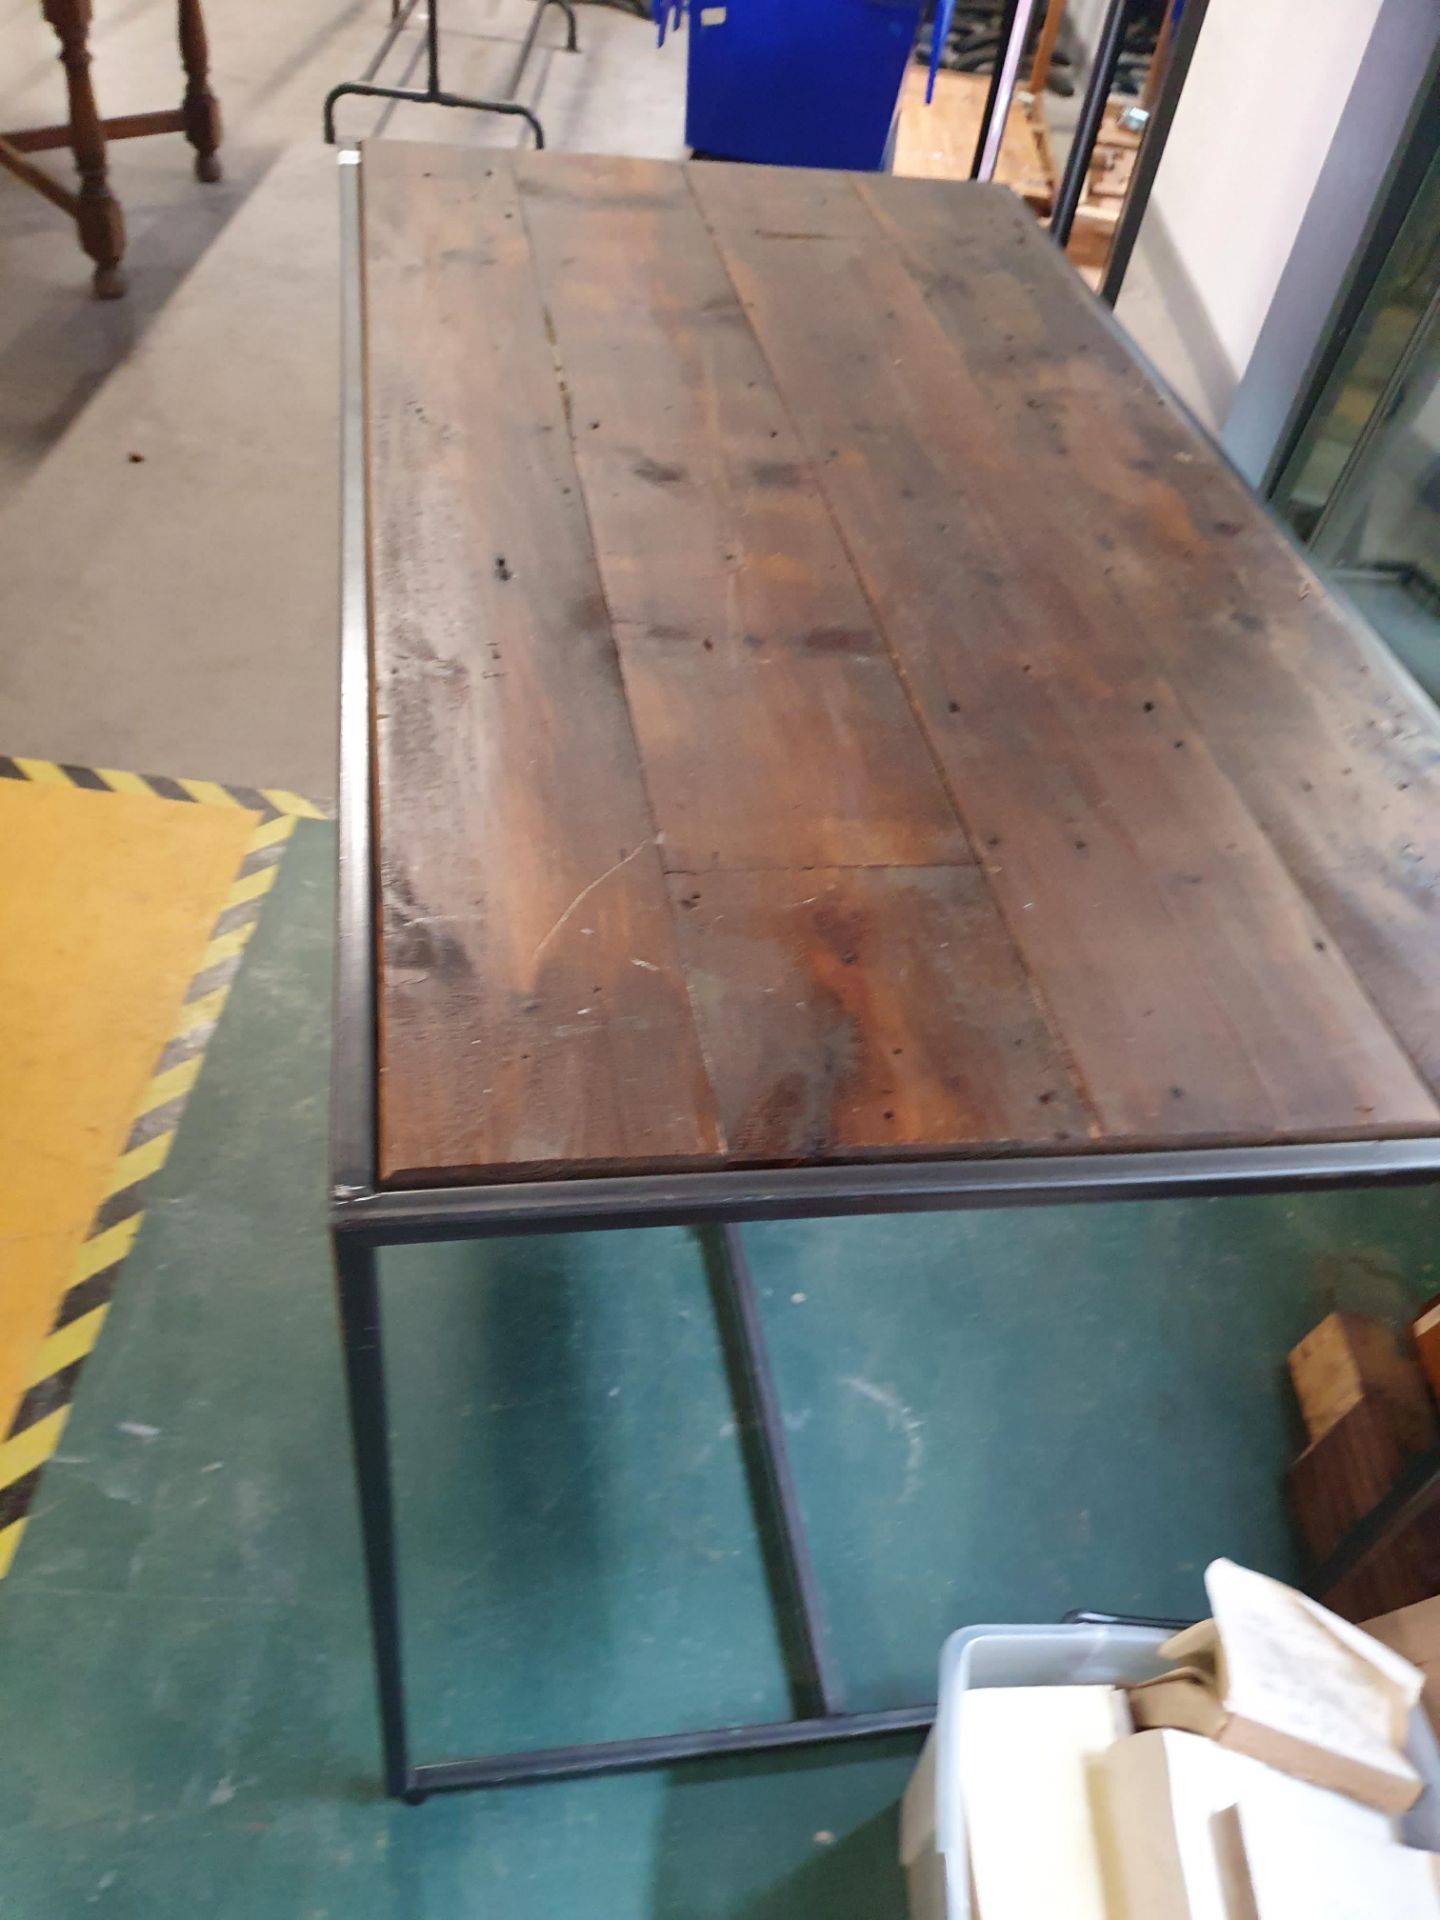 * industrial display table with rustic top - 1500w x 850d x 800h - Image 2 of 3